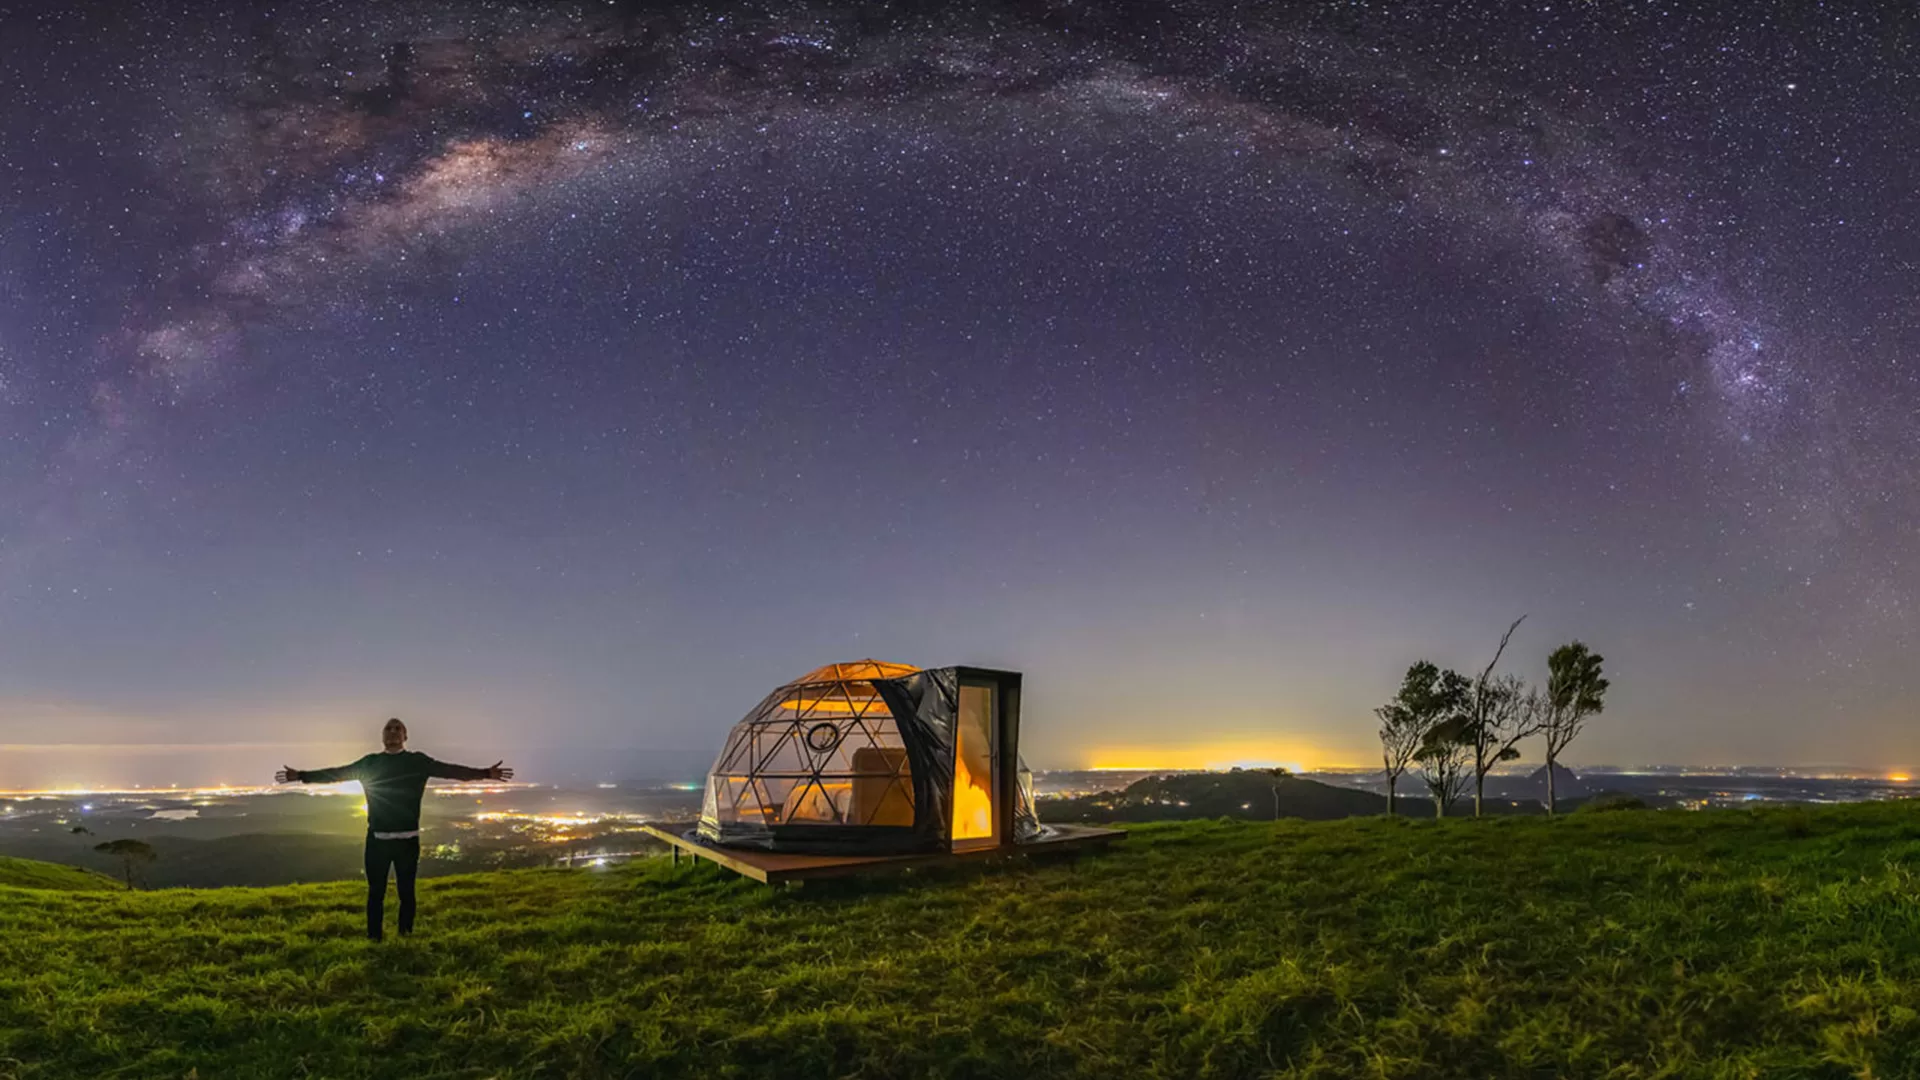 Geodesic dome accommodation under the Milky Way galaxy, ideal for a unique stargazing retreat on the Sunshine Coast.